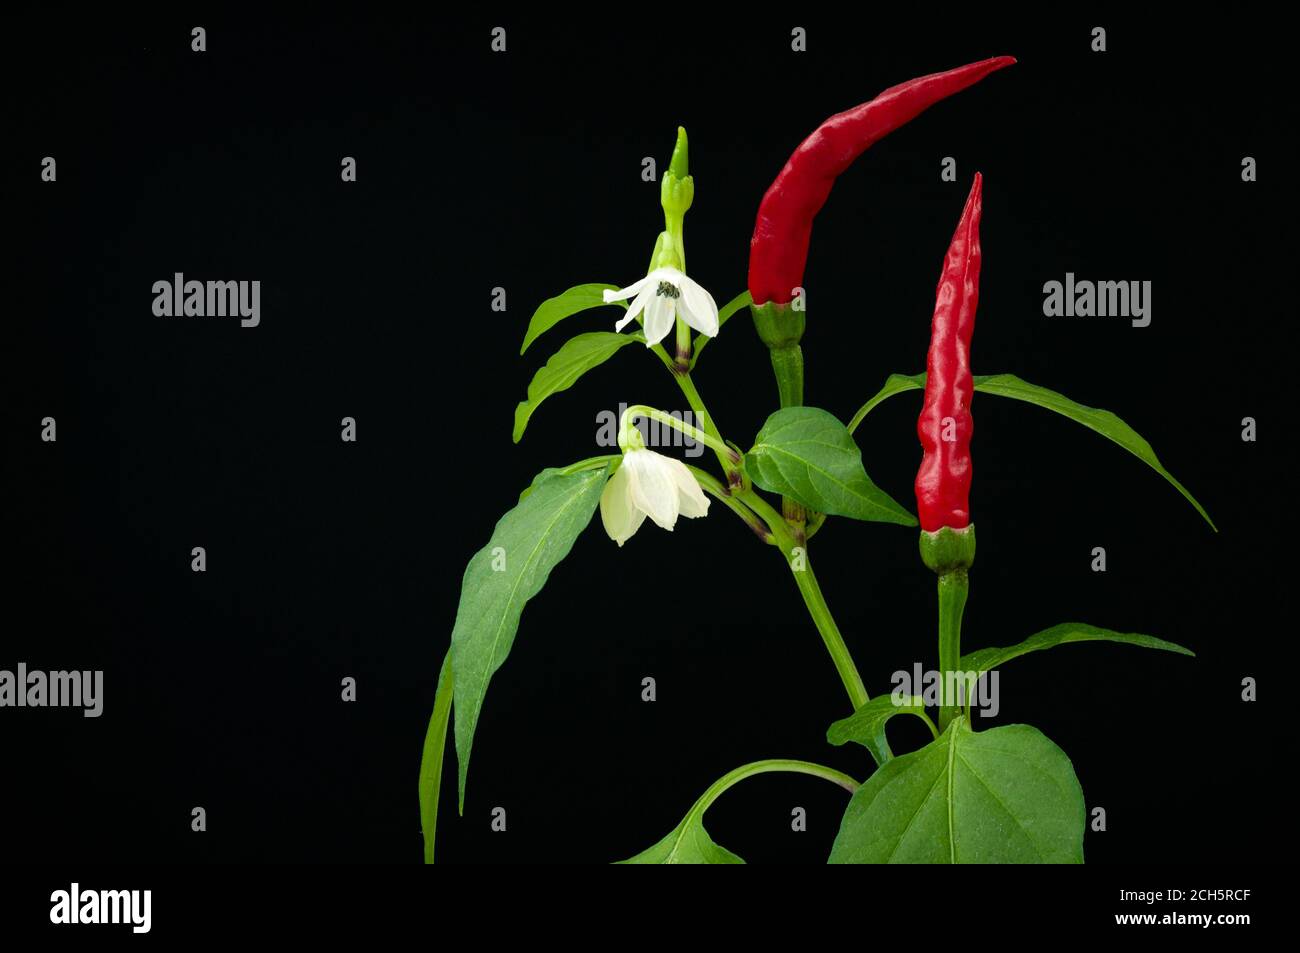 Red hot pepper twig with flowers, fruits and leaves on a black background. Stock Photo